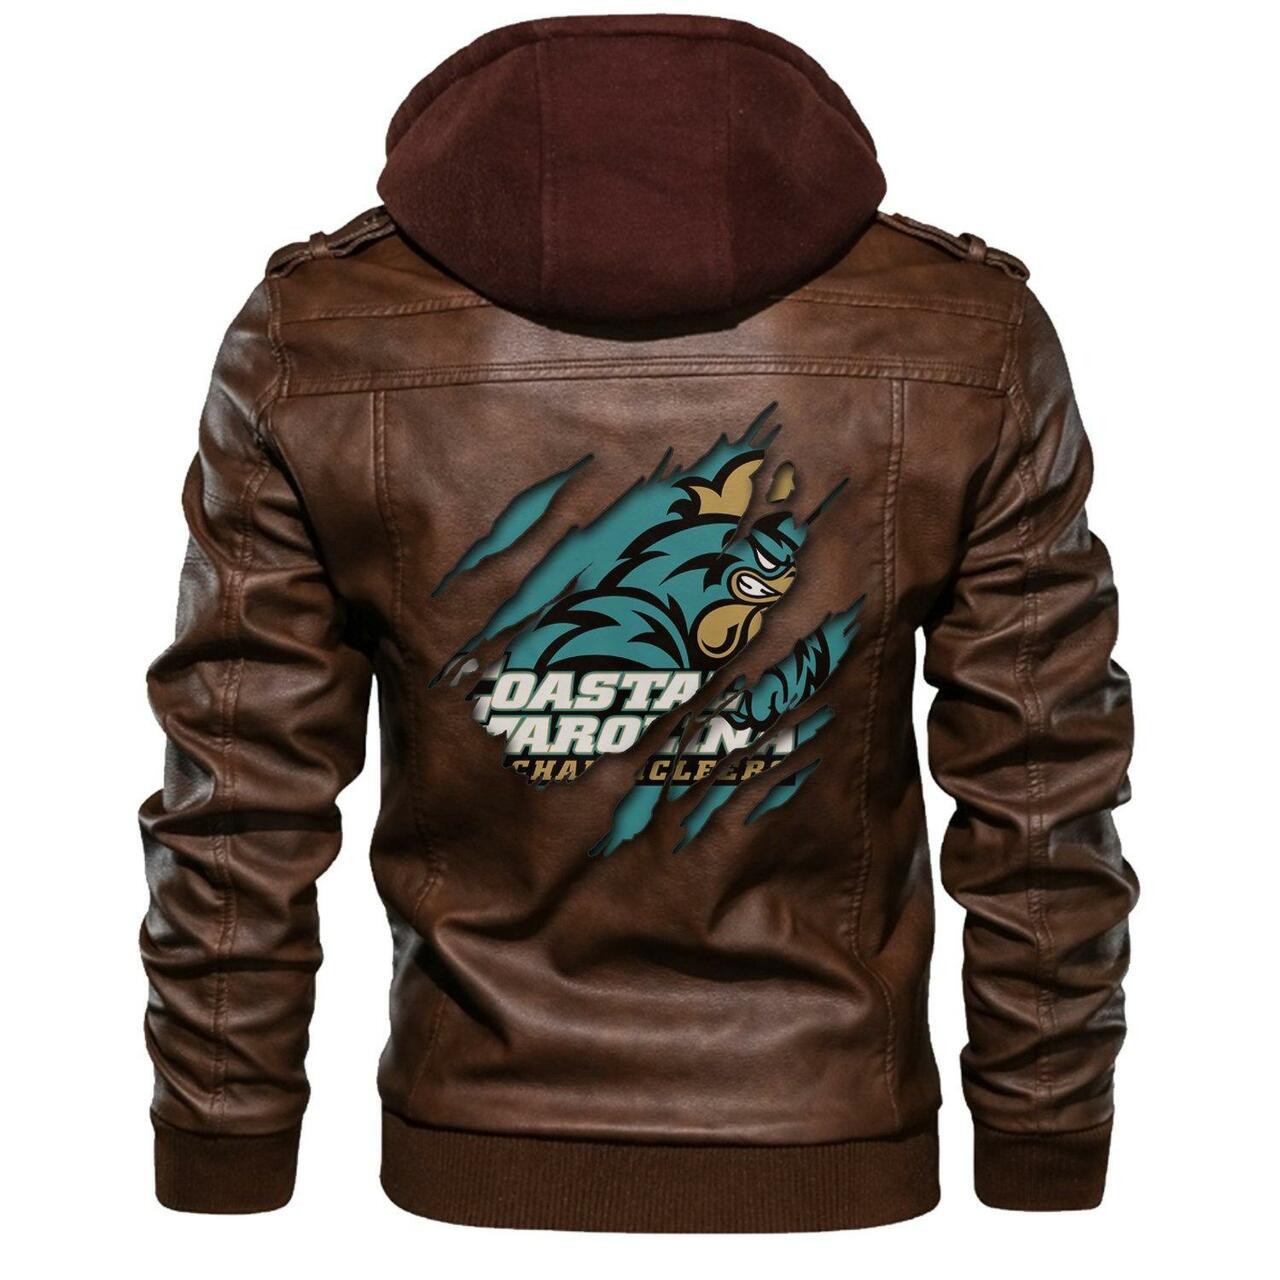 If you're looking for a trendy shirt hoodie, check out below 71